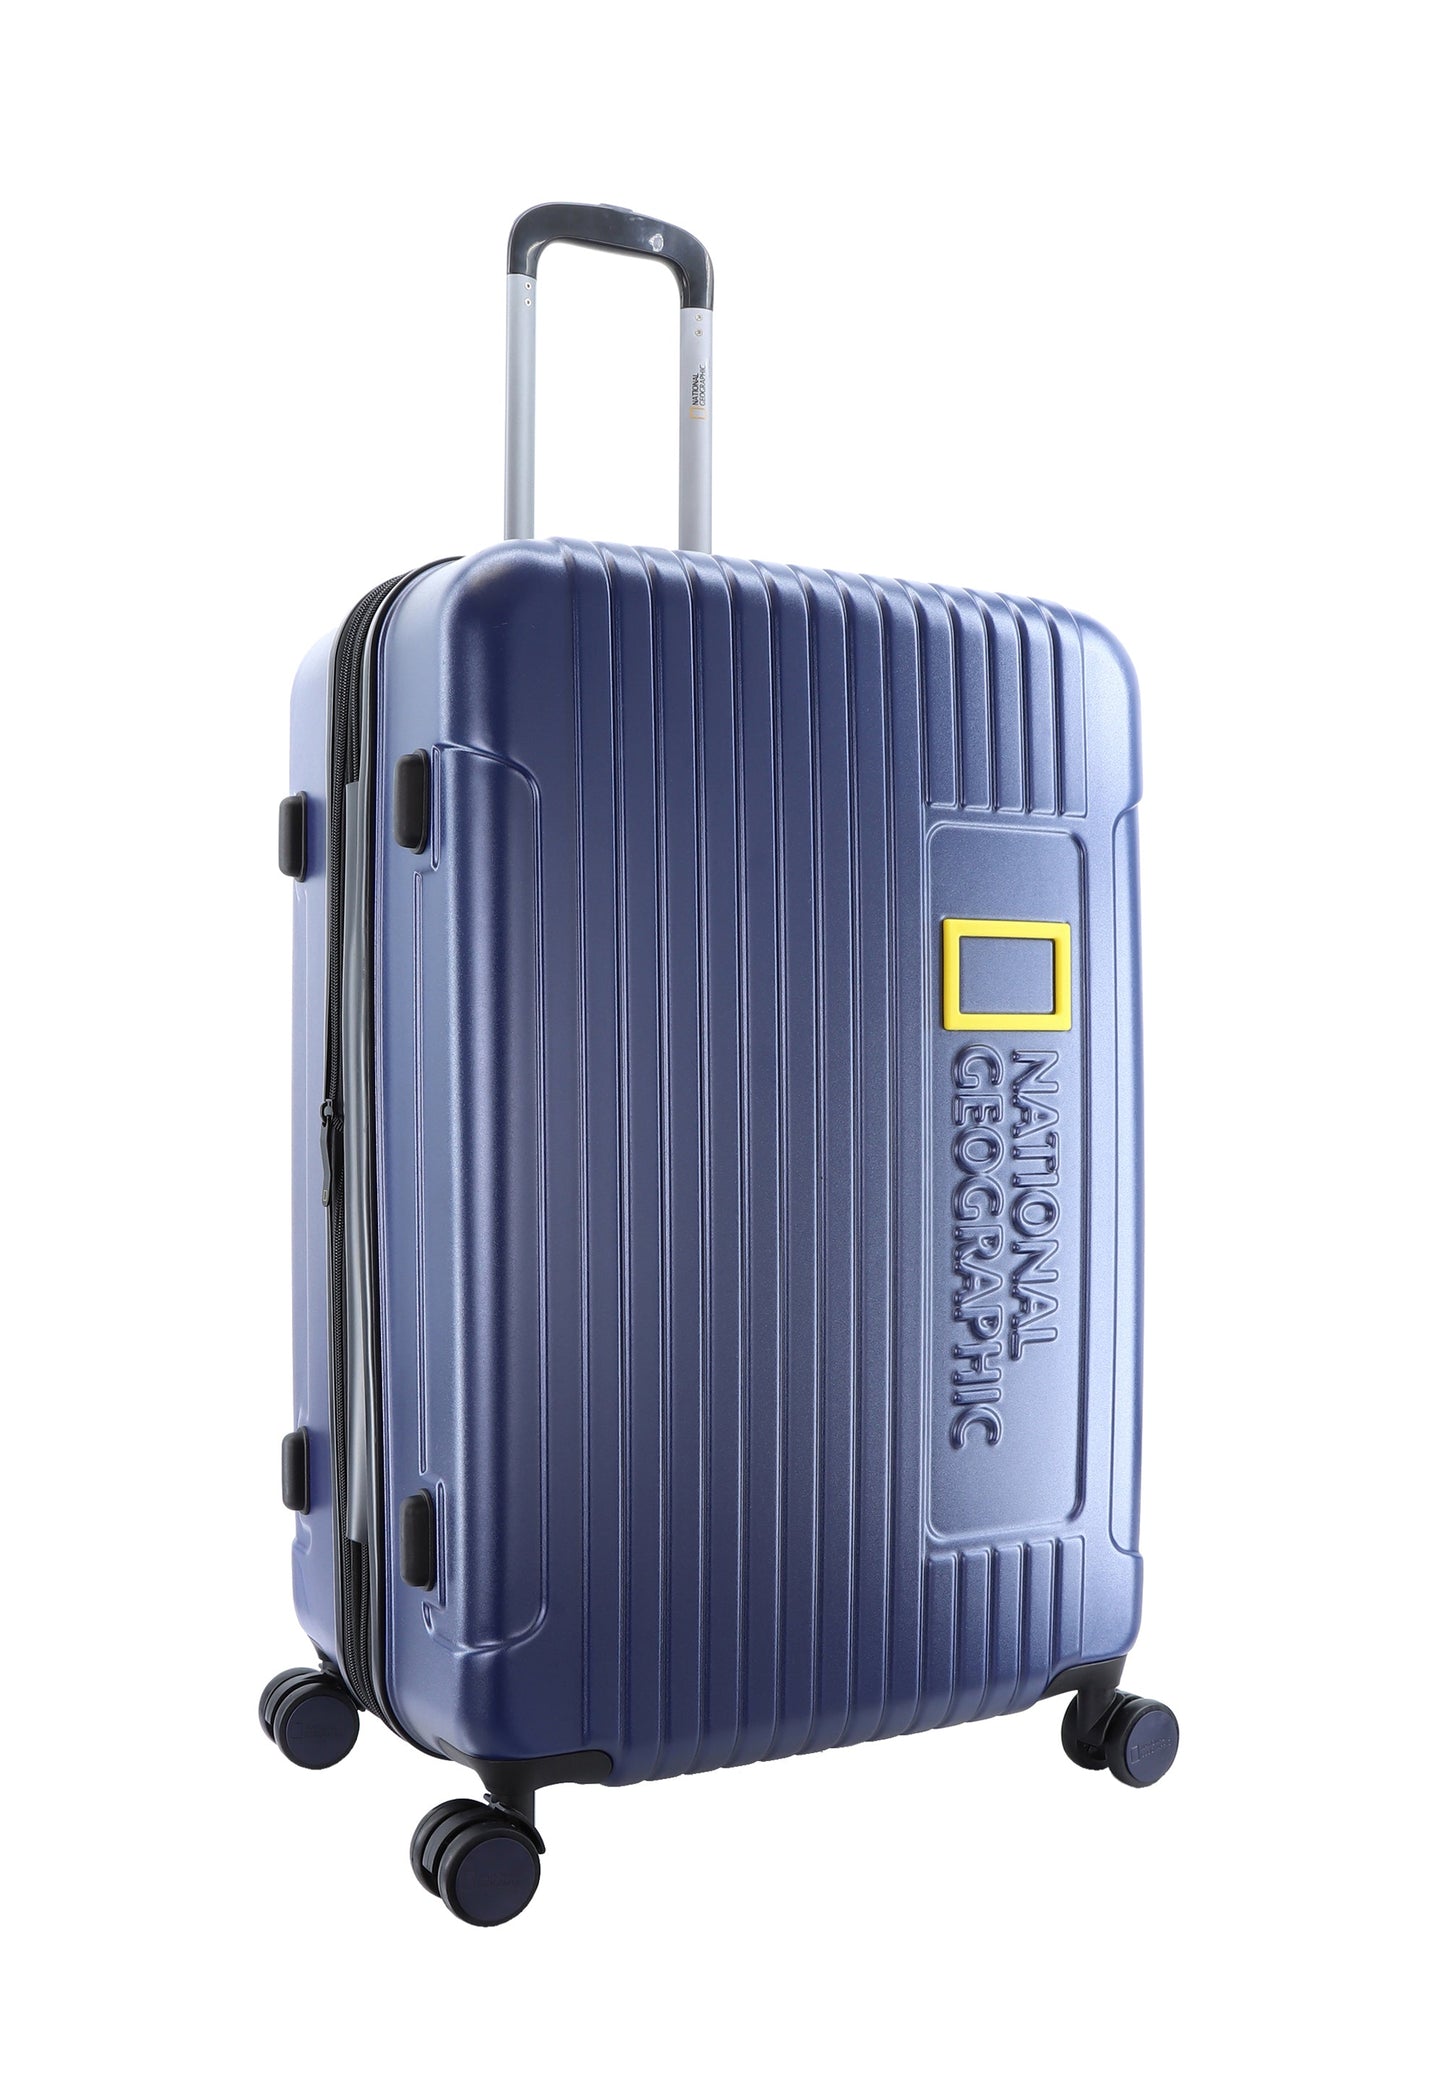 National Geographic Canyon L - Voorkant Blauw hard reiskoffer | luggage4u.be